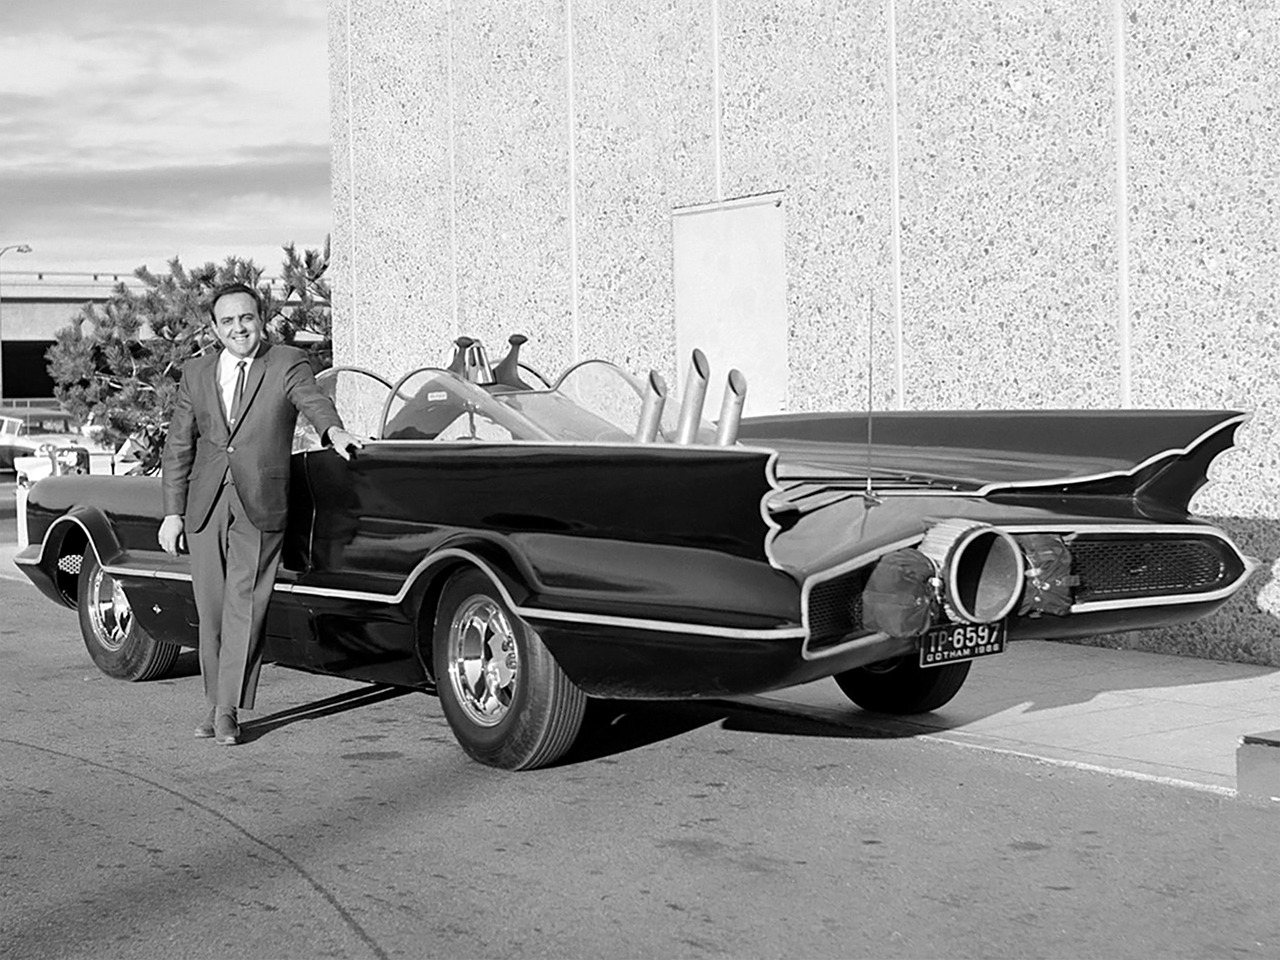 Lincoln Futura Batmobile by Barris Kustom (1966) - Old Concept Cars